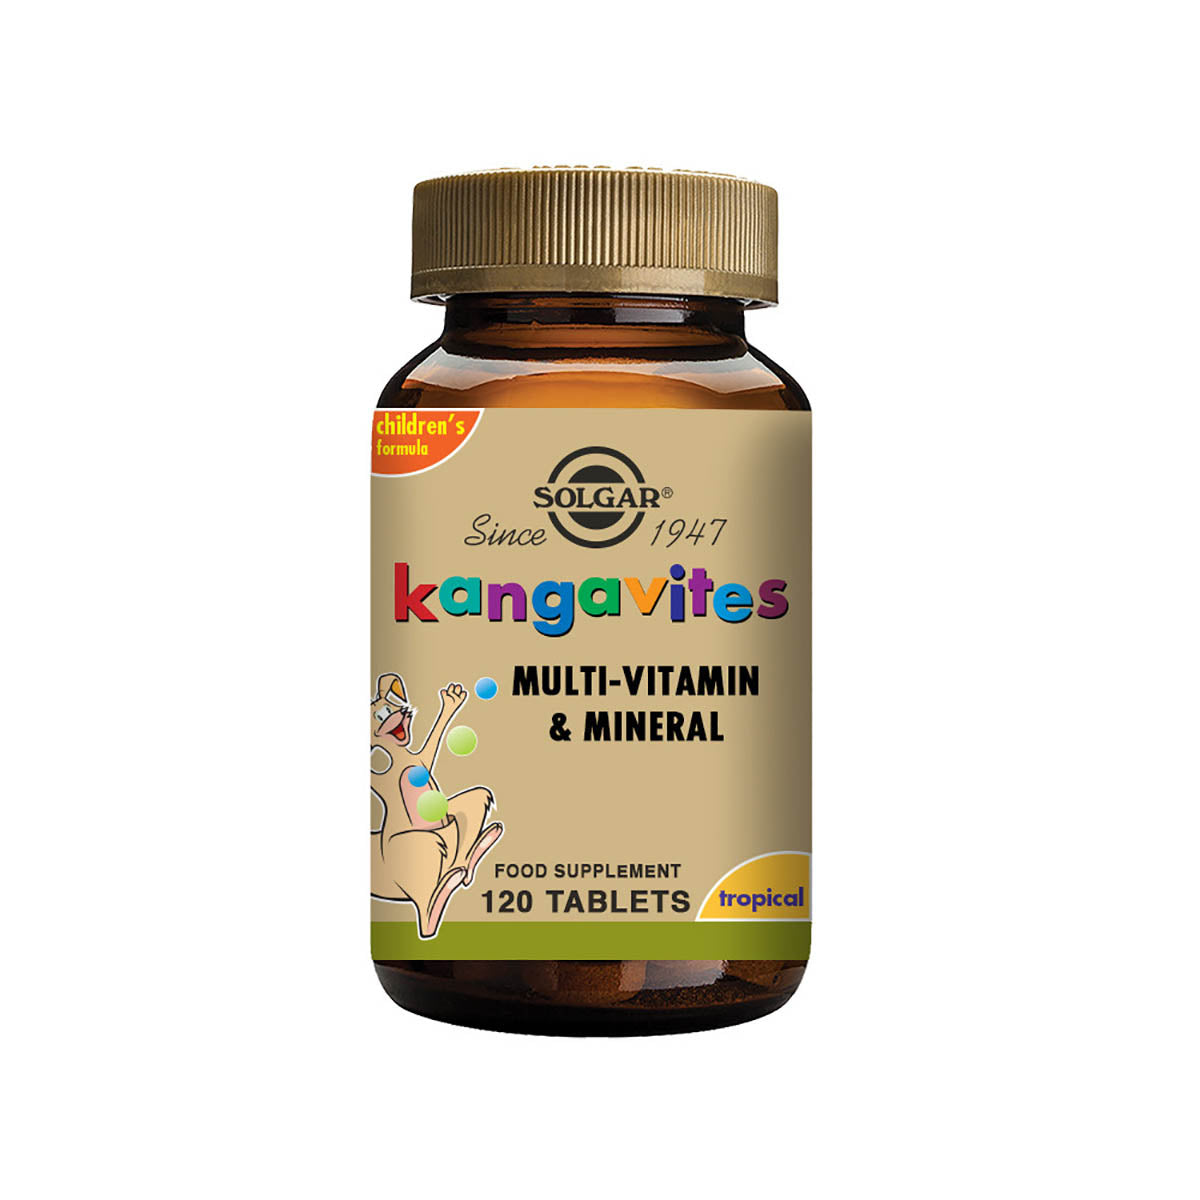 Solgar® Kangavites Tropical Punch Complete Multivitamin and Mineral Formula Chewable Tablets - Pack of 120